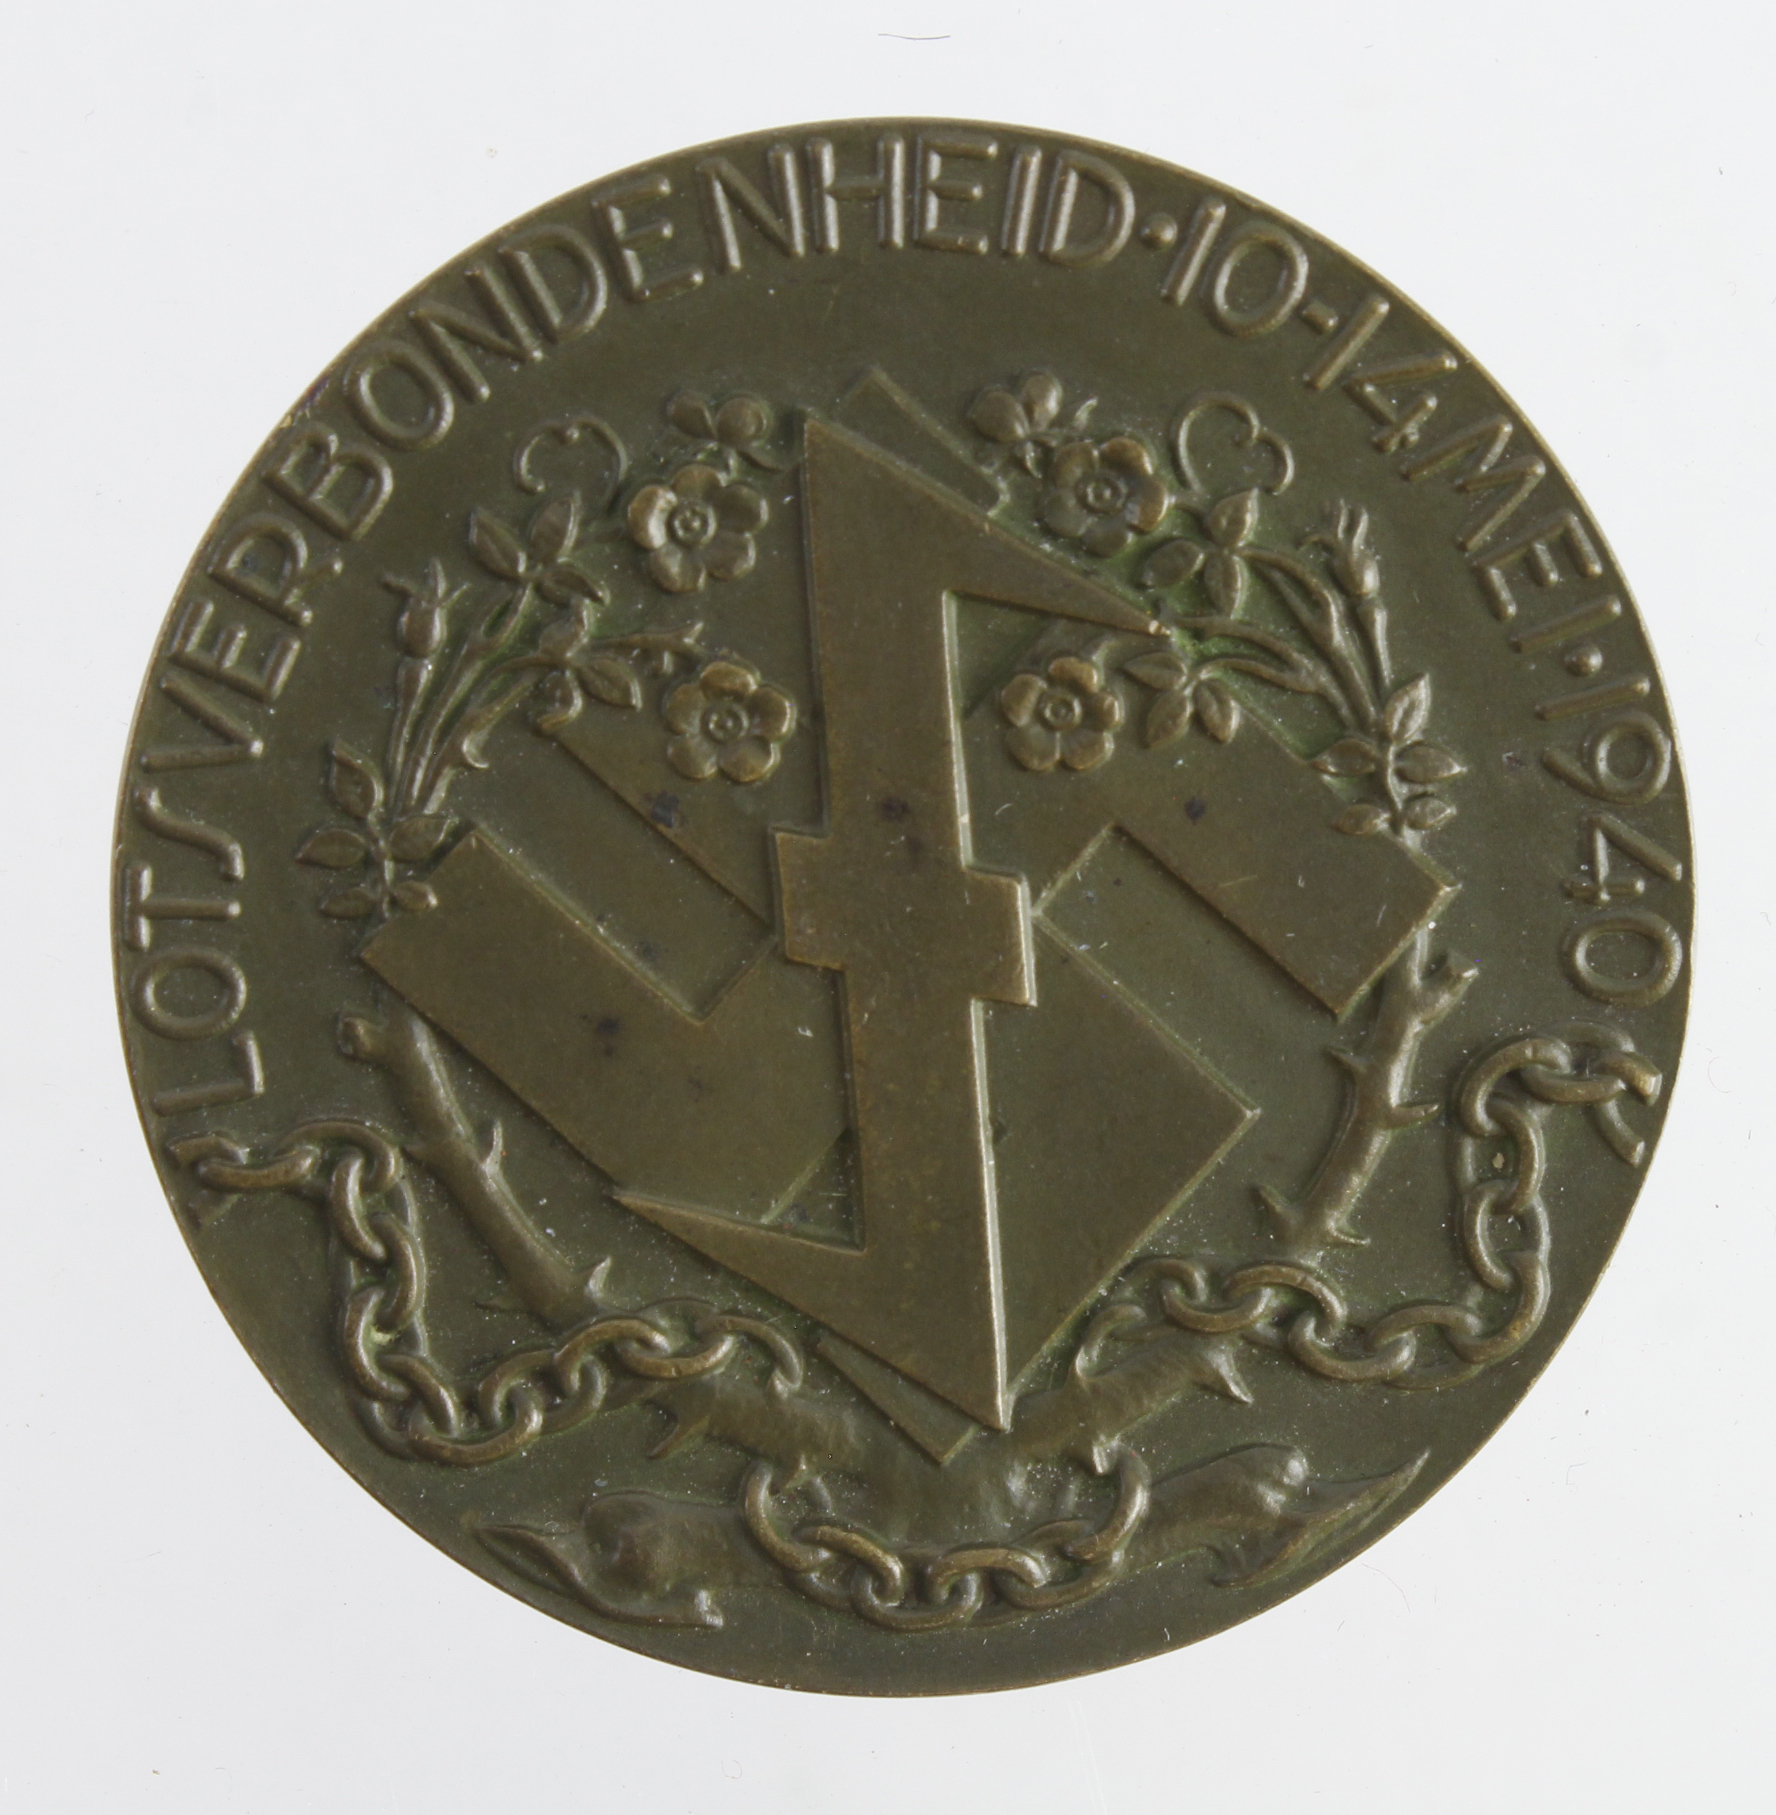 Germany from a one owner collection a most interesting medallion for the Dutch Fascists